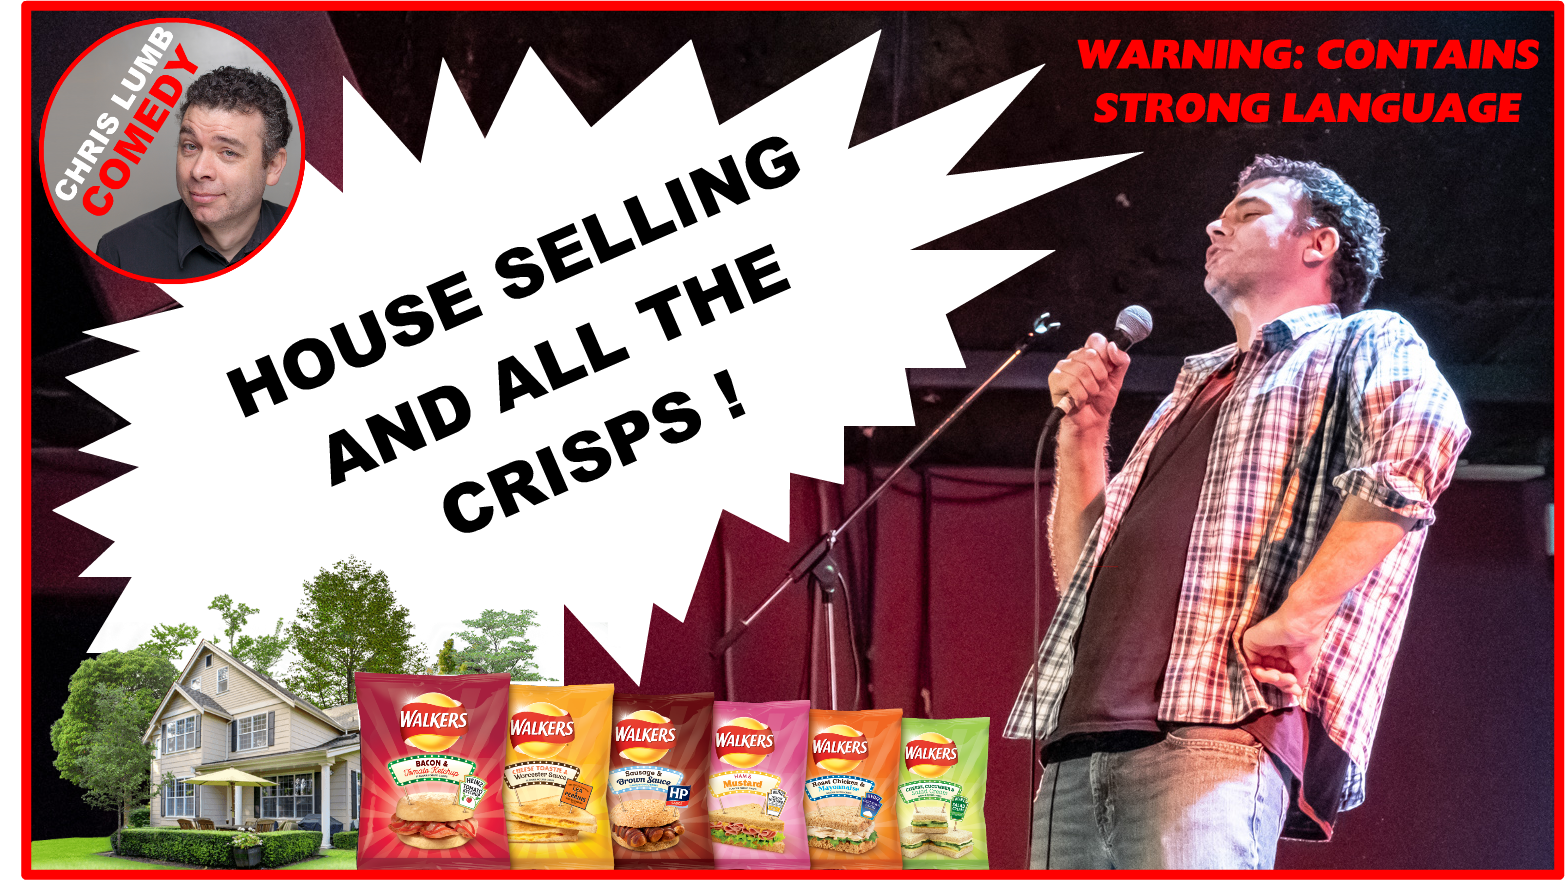 Chris Lumb Comedy "House Selling and all the Crisps"